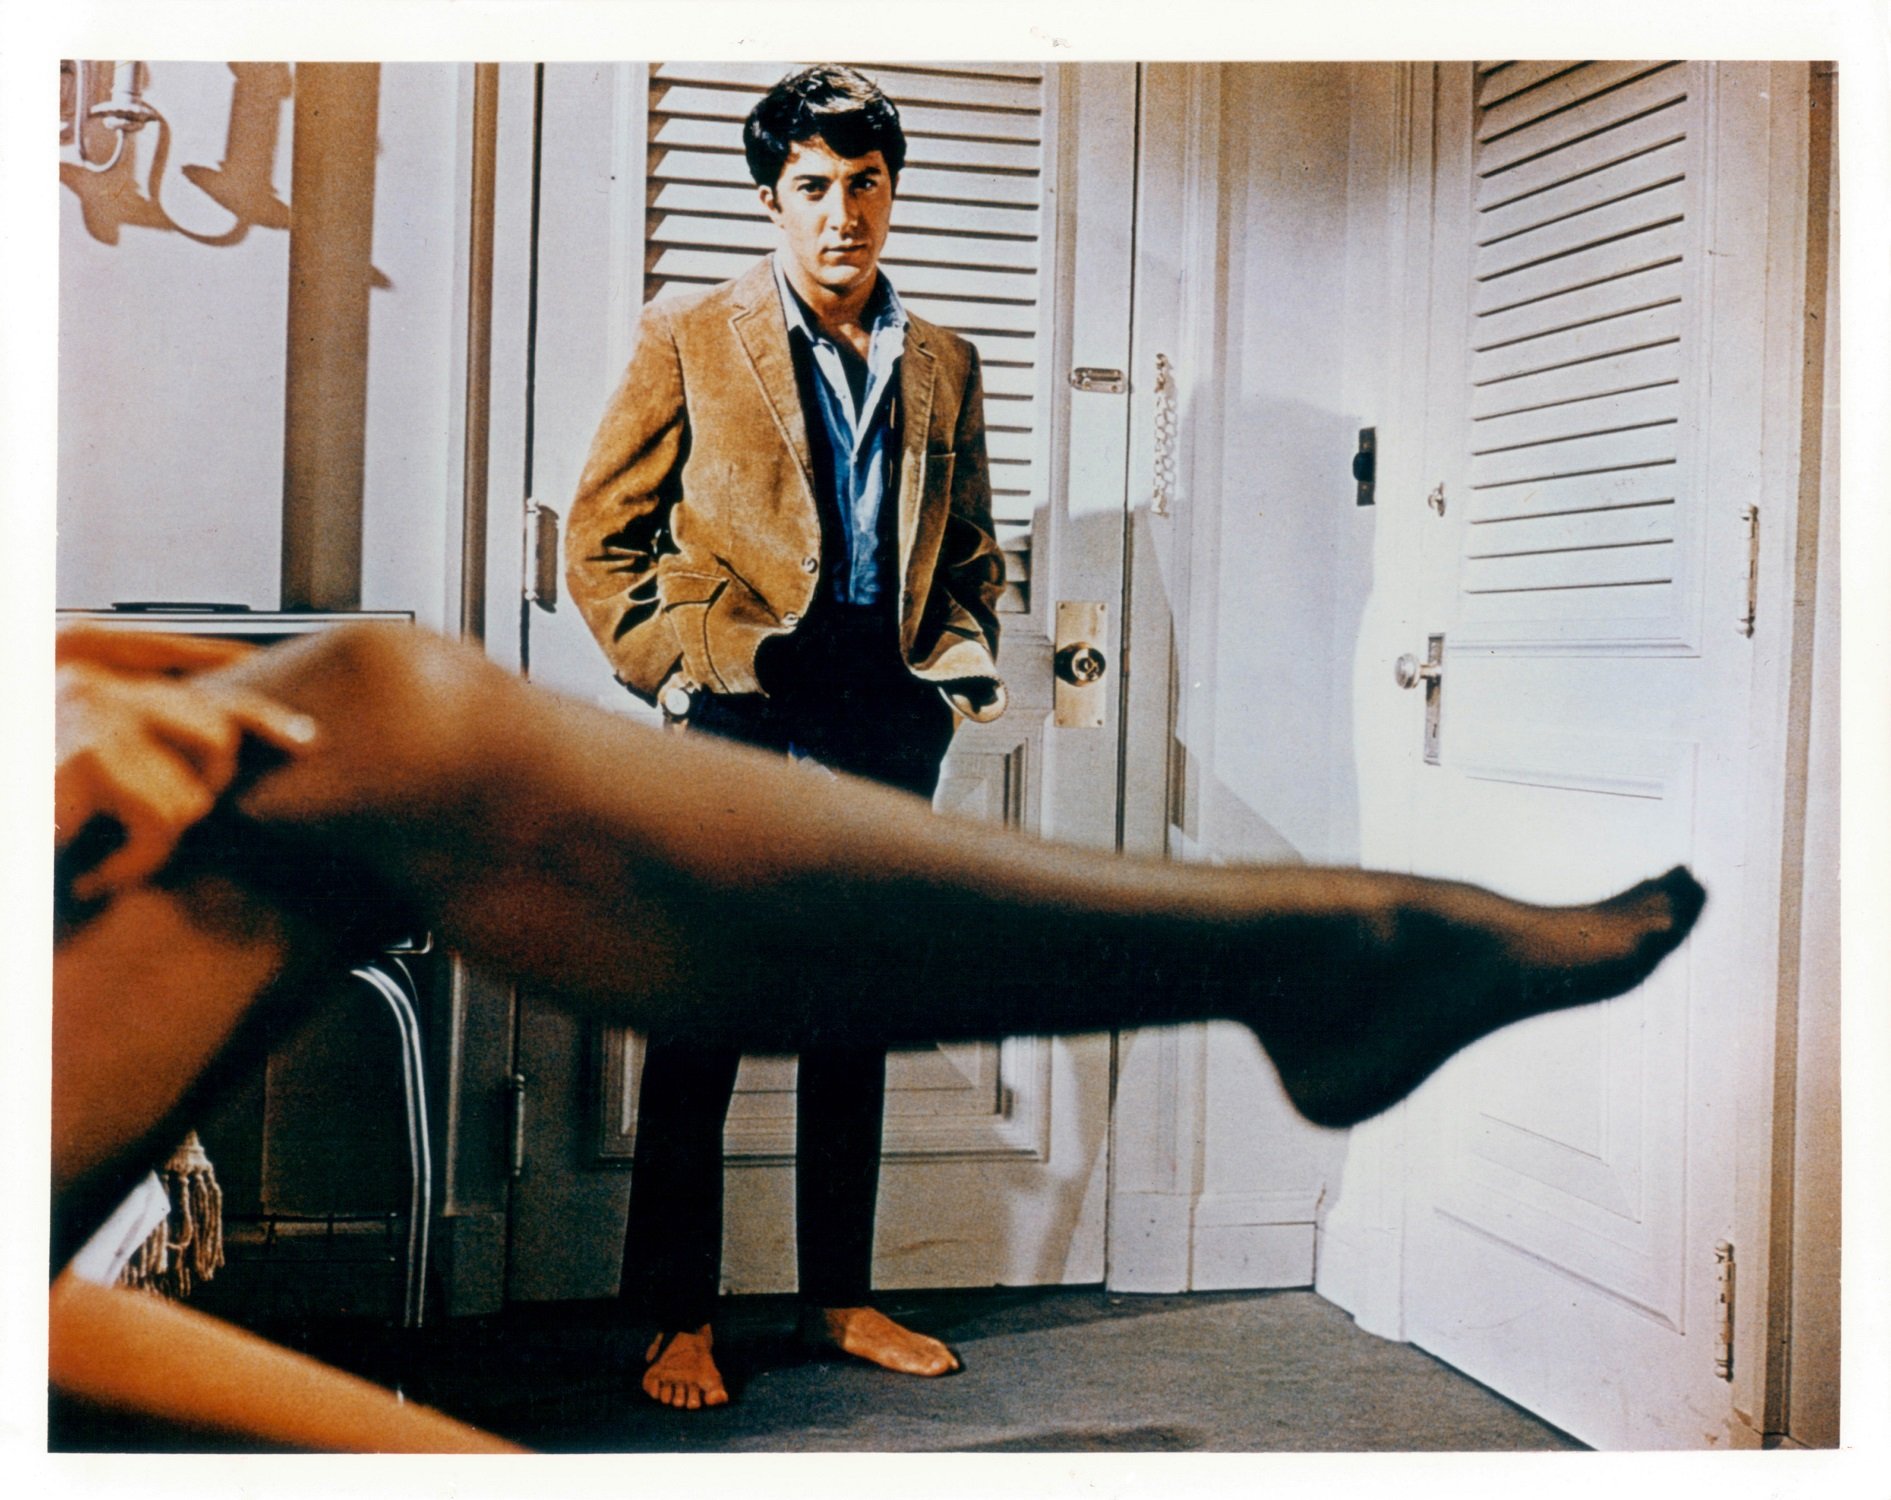 Anne Bancroft pulling on stocking in front of Dustin Hoffman in a scene from 'The Graduate'